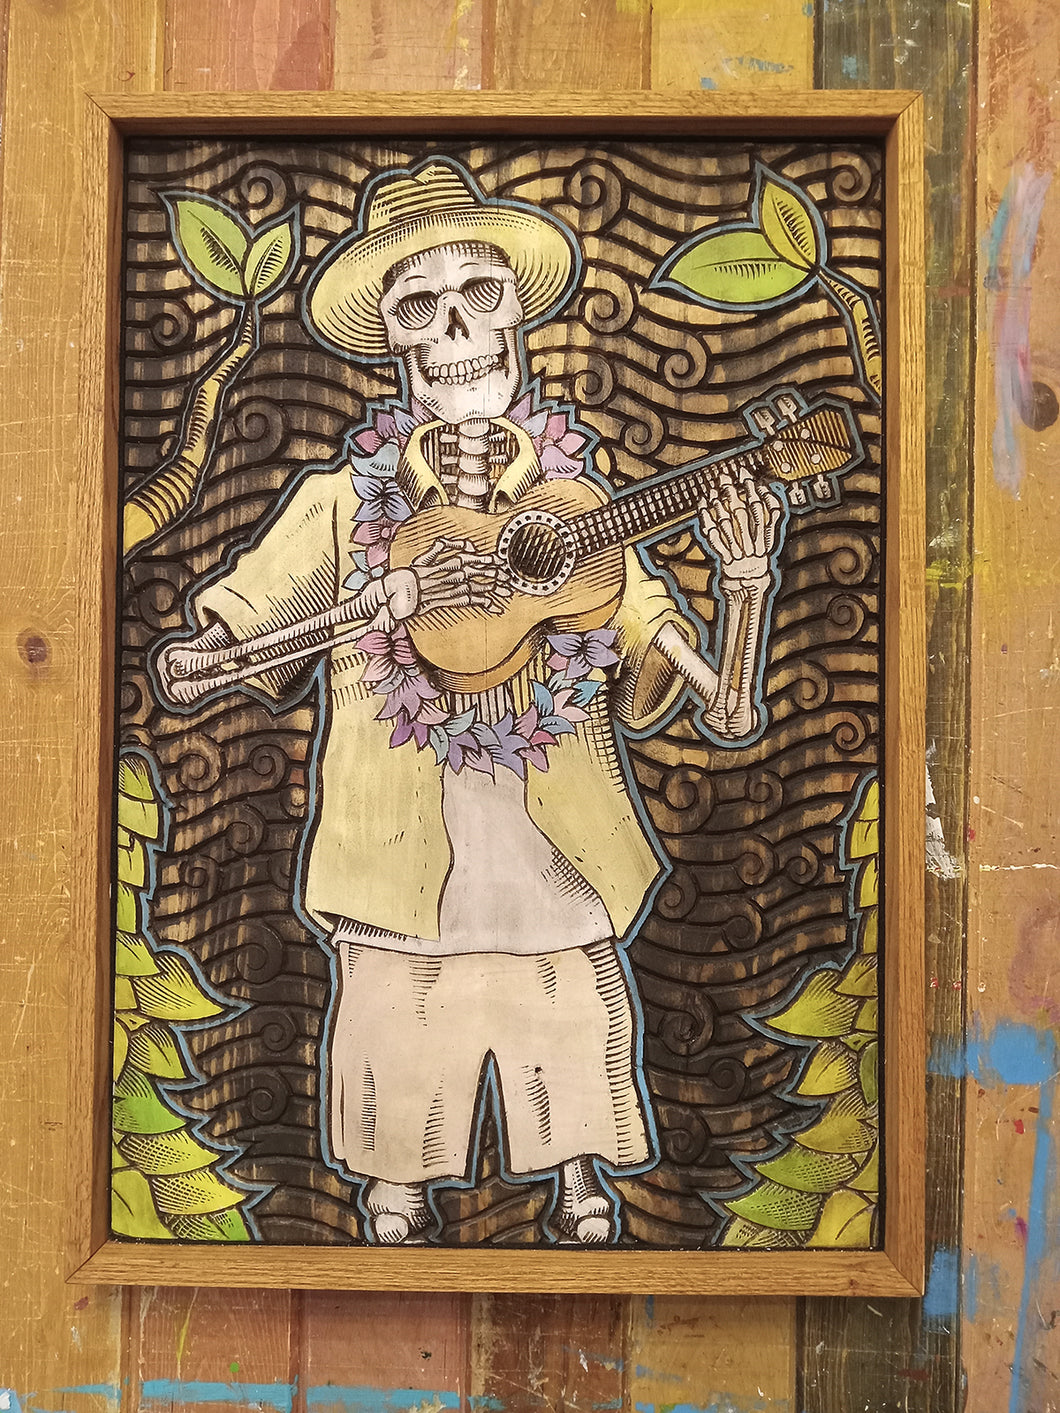 Tiki-Inspired Skeleton Ukulele Player Wood Carved and Painted Artwork, Framed in Oak - Dedicated to Don the Beachcomber